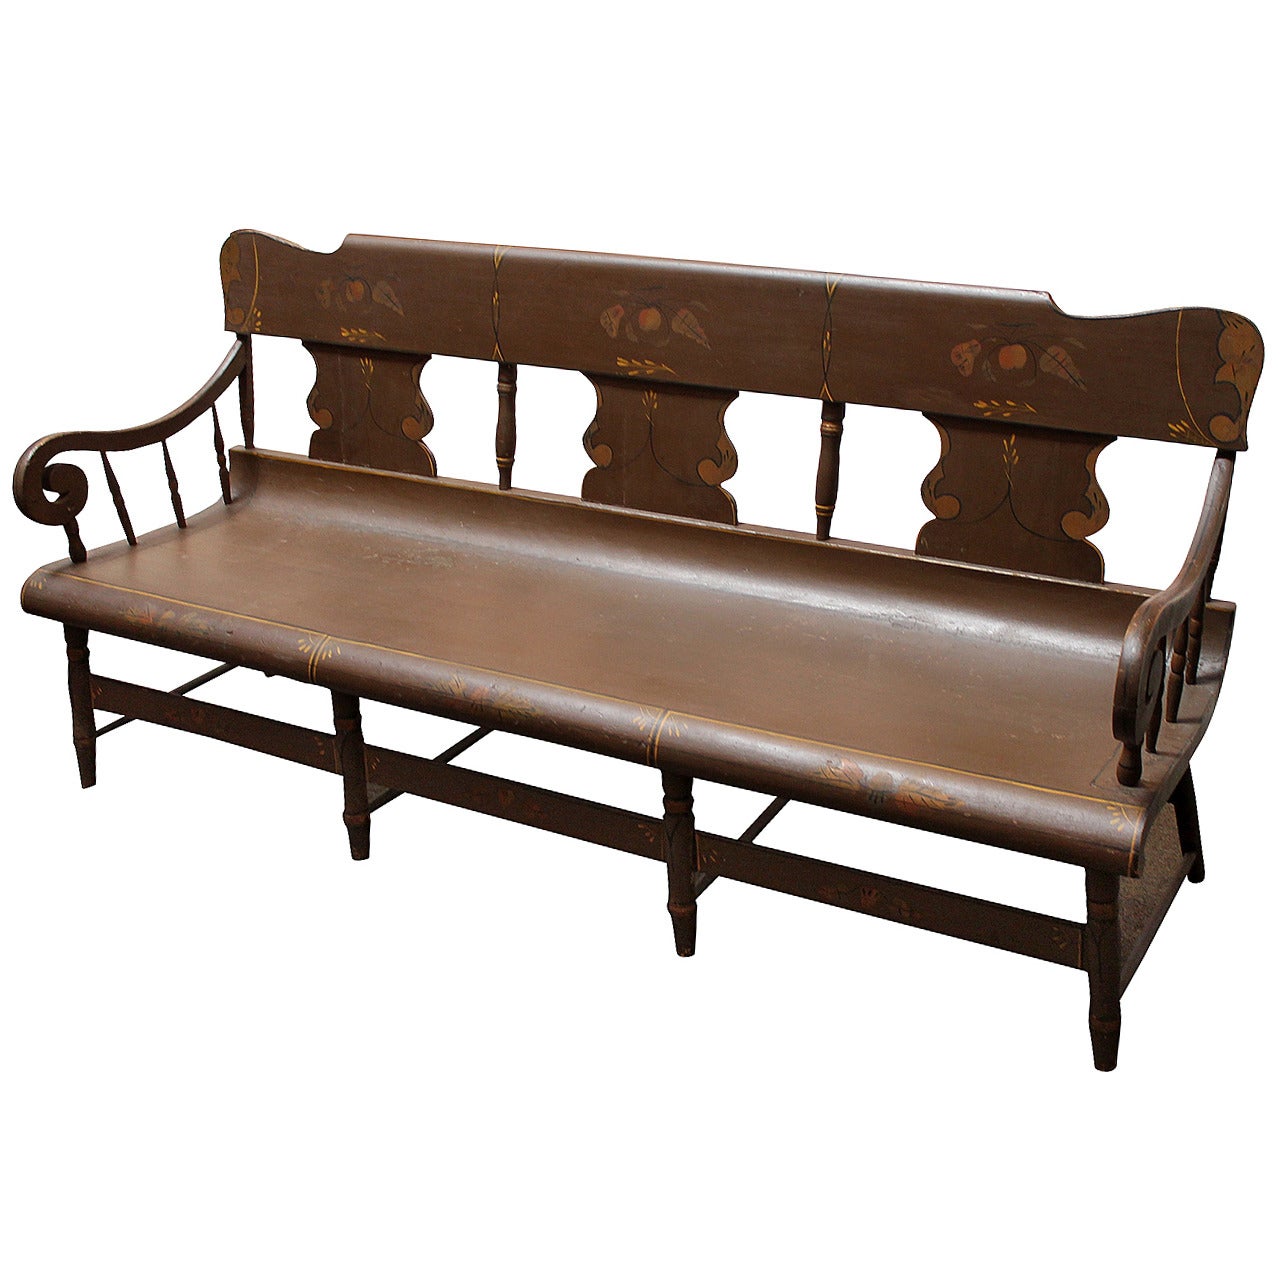 Finely Decorated and Painted 19th Century Settle Bench from Pennsylvania